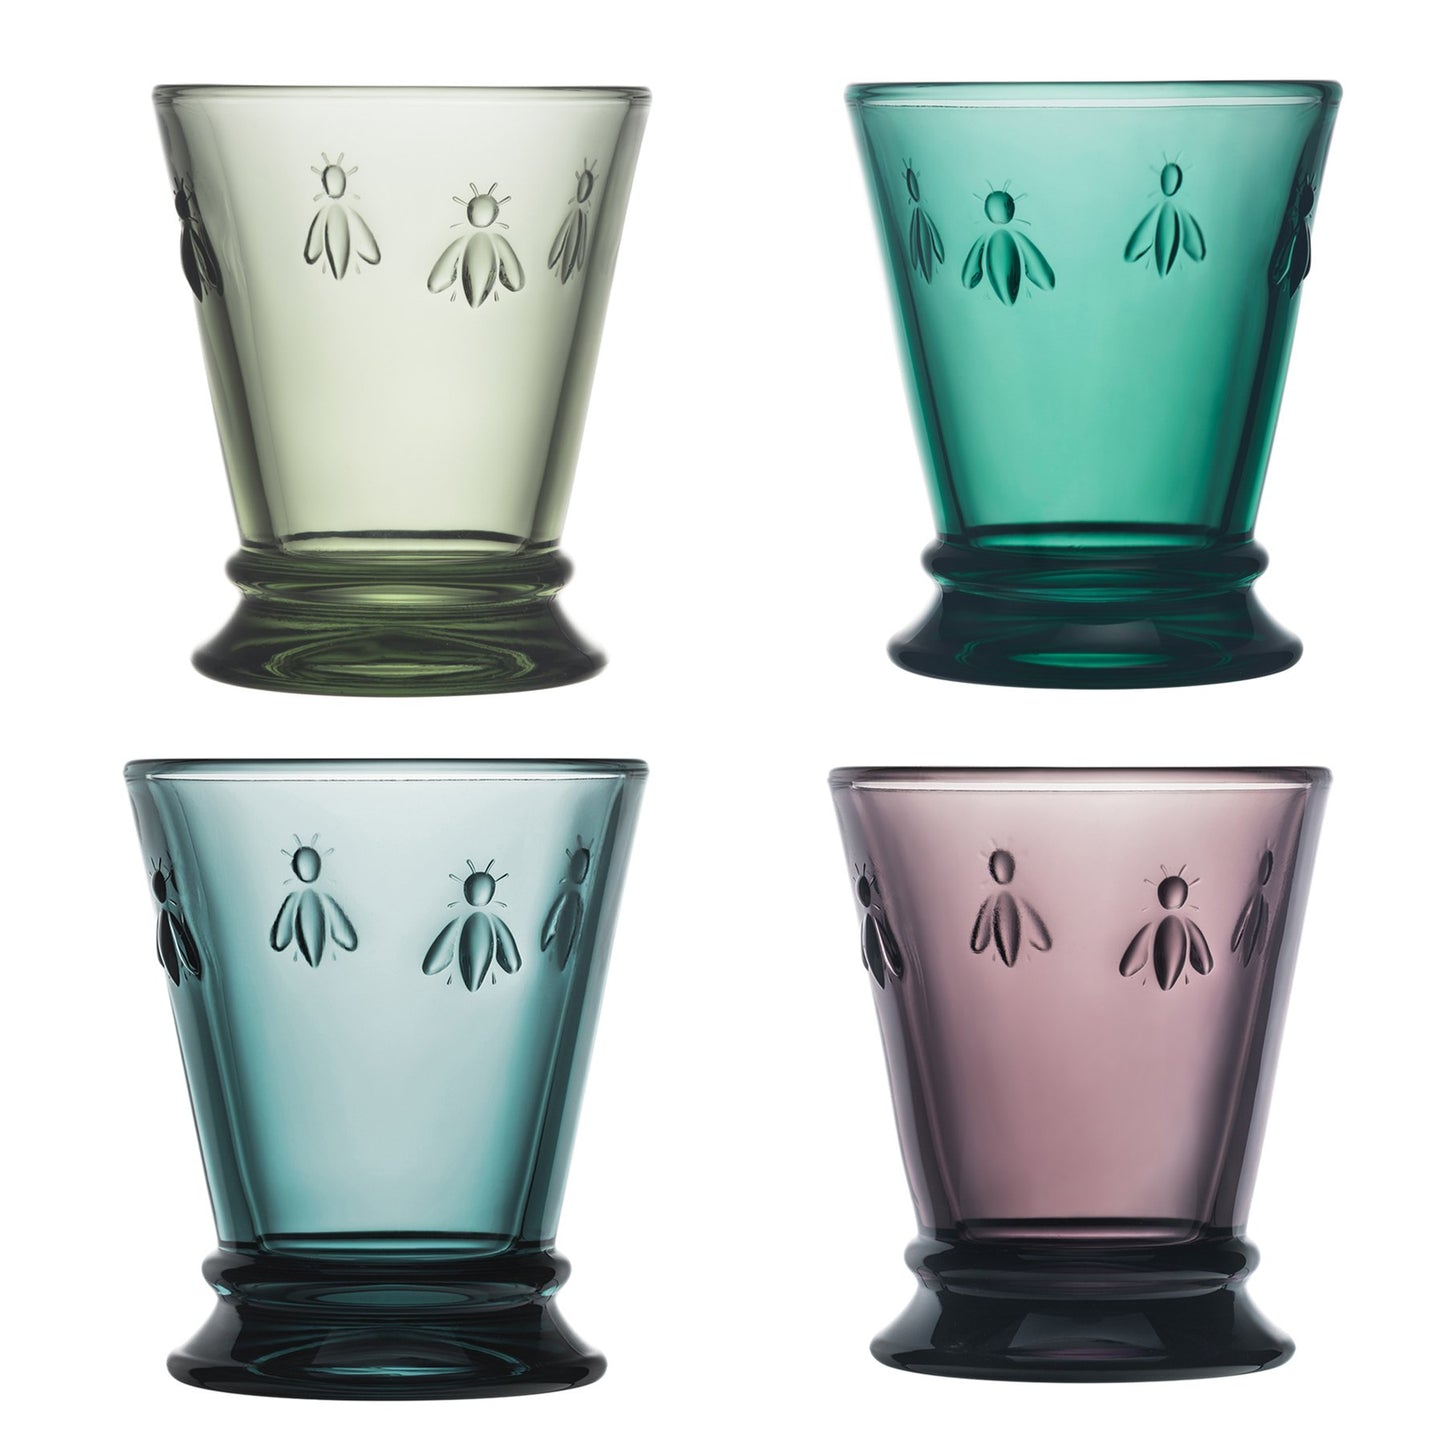 Abeille Bee 4 Assorted Colours Tumbler [Set of 4]